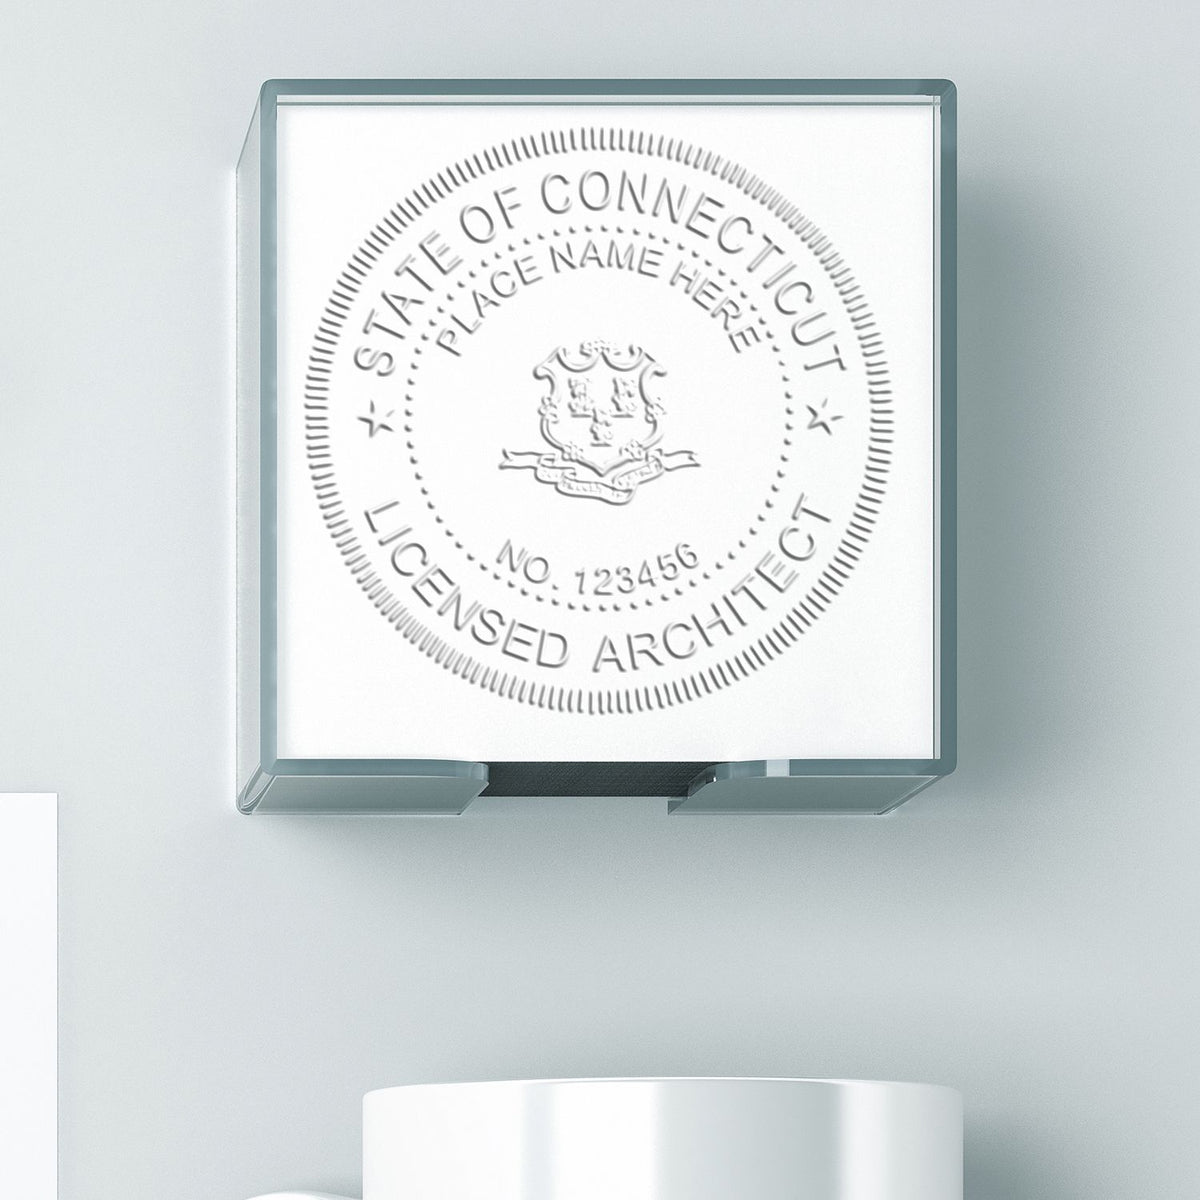 The Connecticut Desk Architect Embossing Seal stamp impression comes to life with a crisp, detailed photo on paper - showcasing true professional quality.